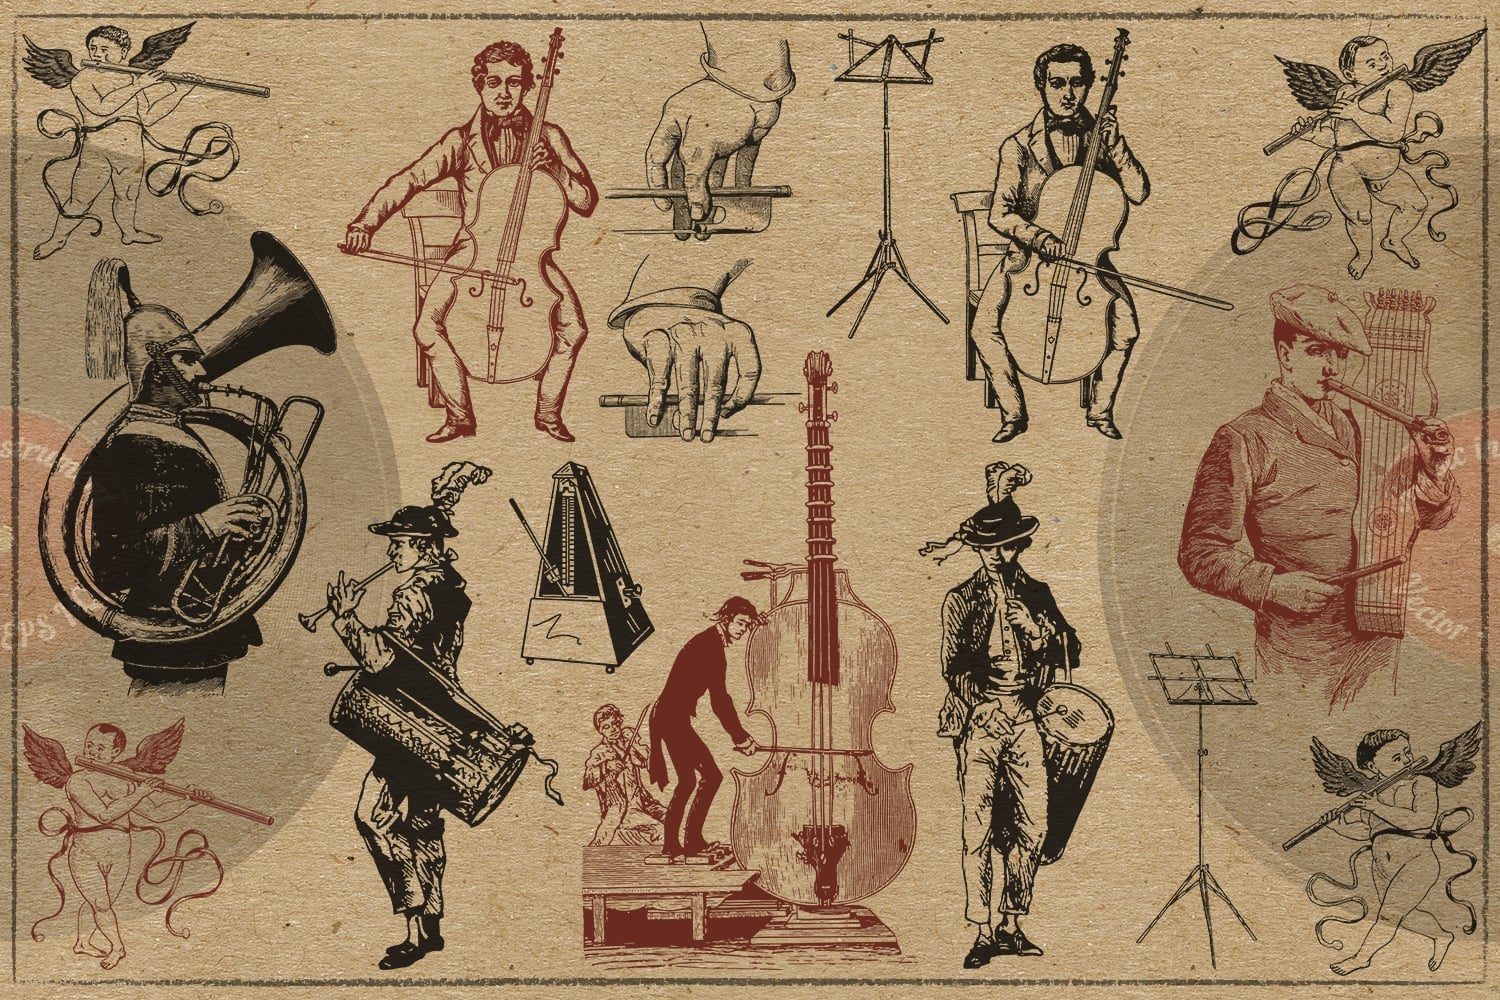 Vintage images of men playing musical instruments.